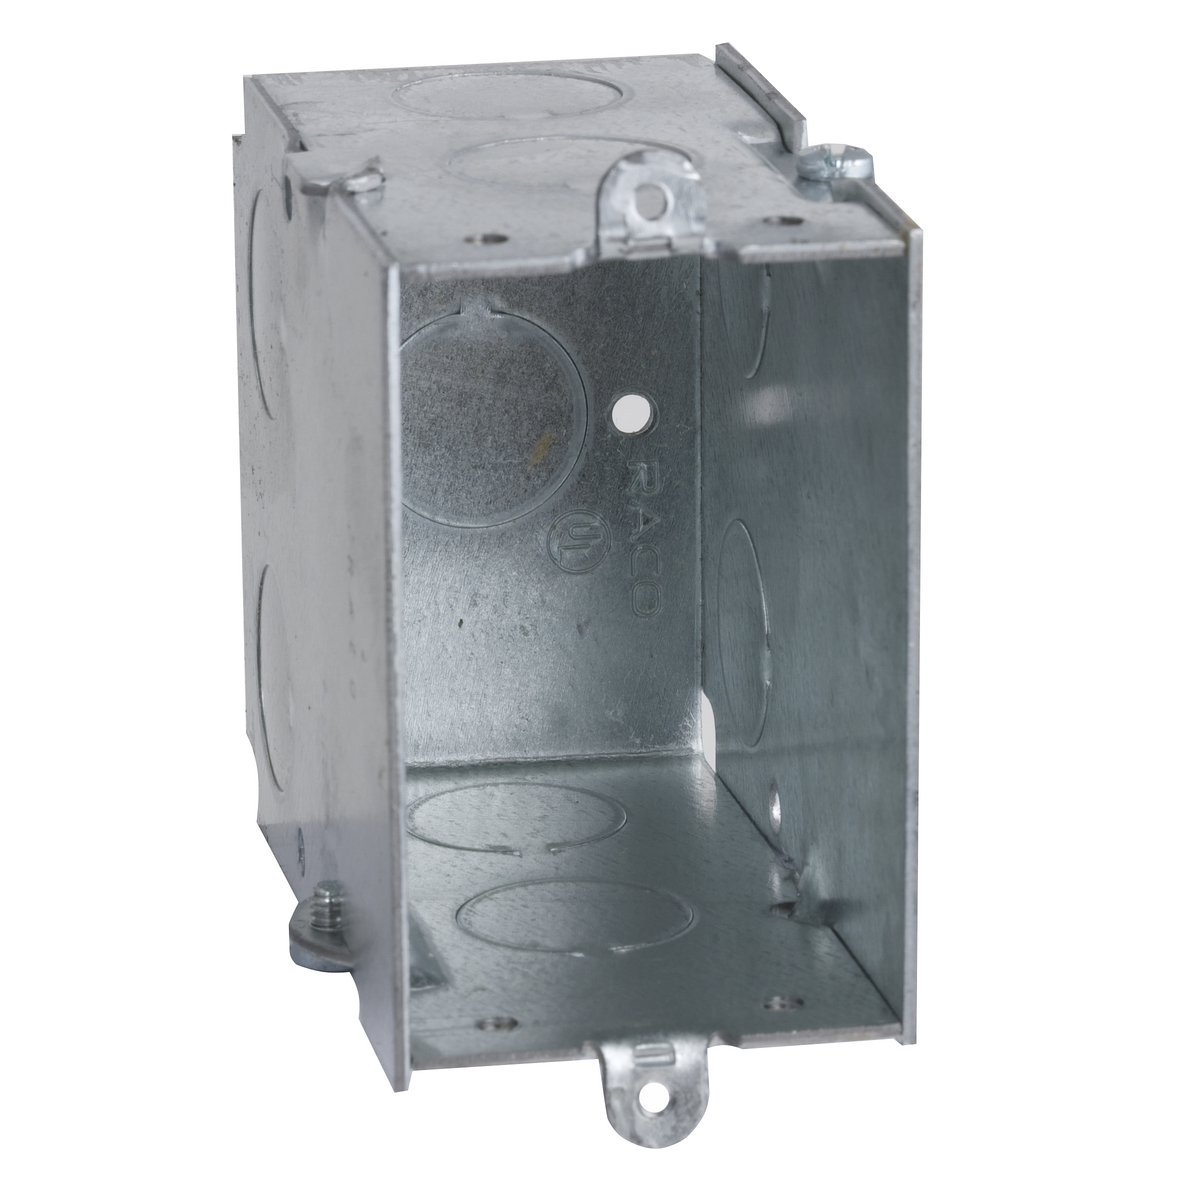 Crouse-Hinds TP604 4 x 2-1/8 x 2-1/8 Steel Utility Box